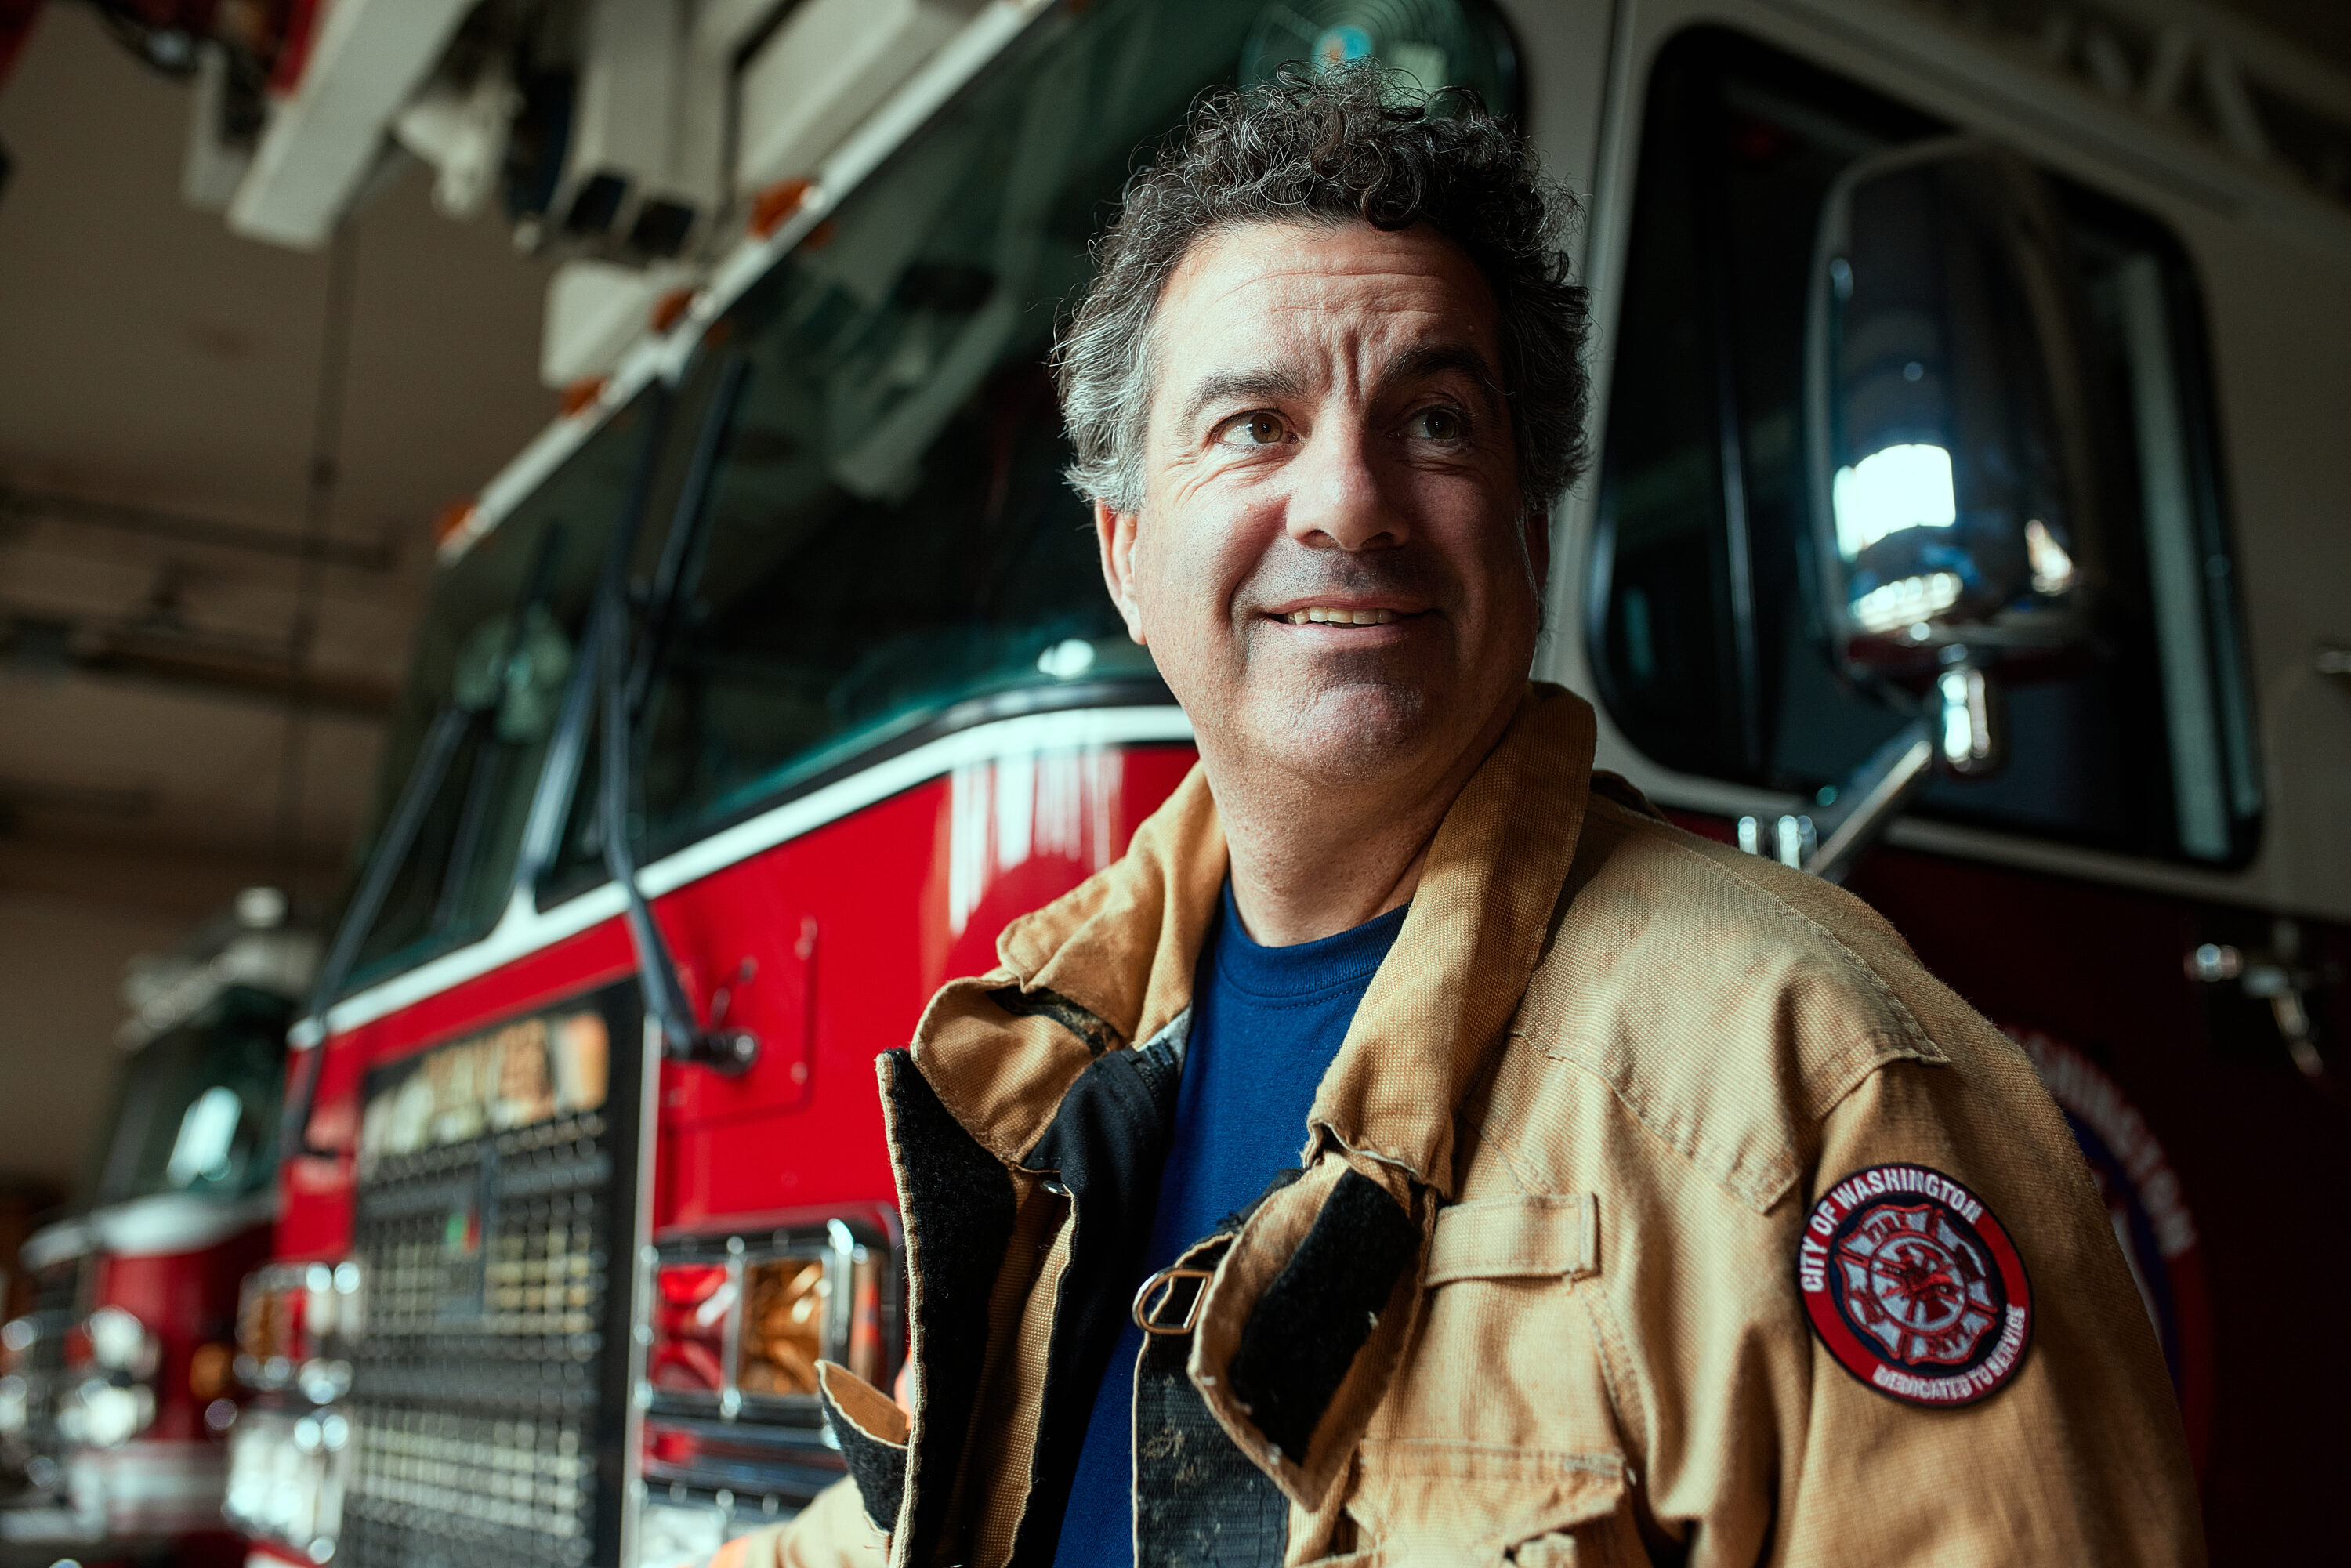 Firefighter smiling in front of a firetruck in a fire station.